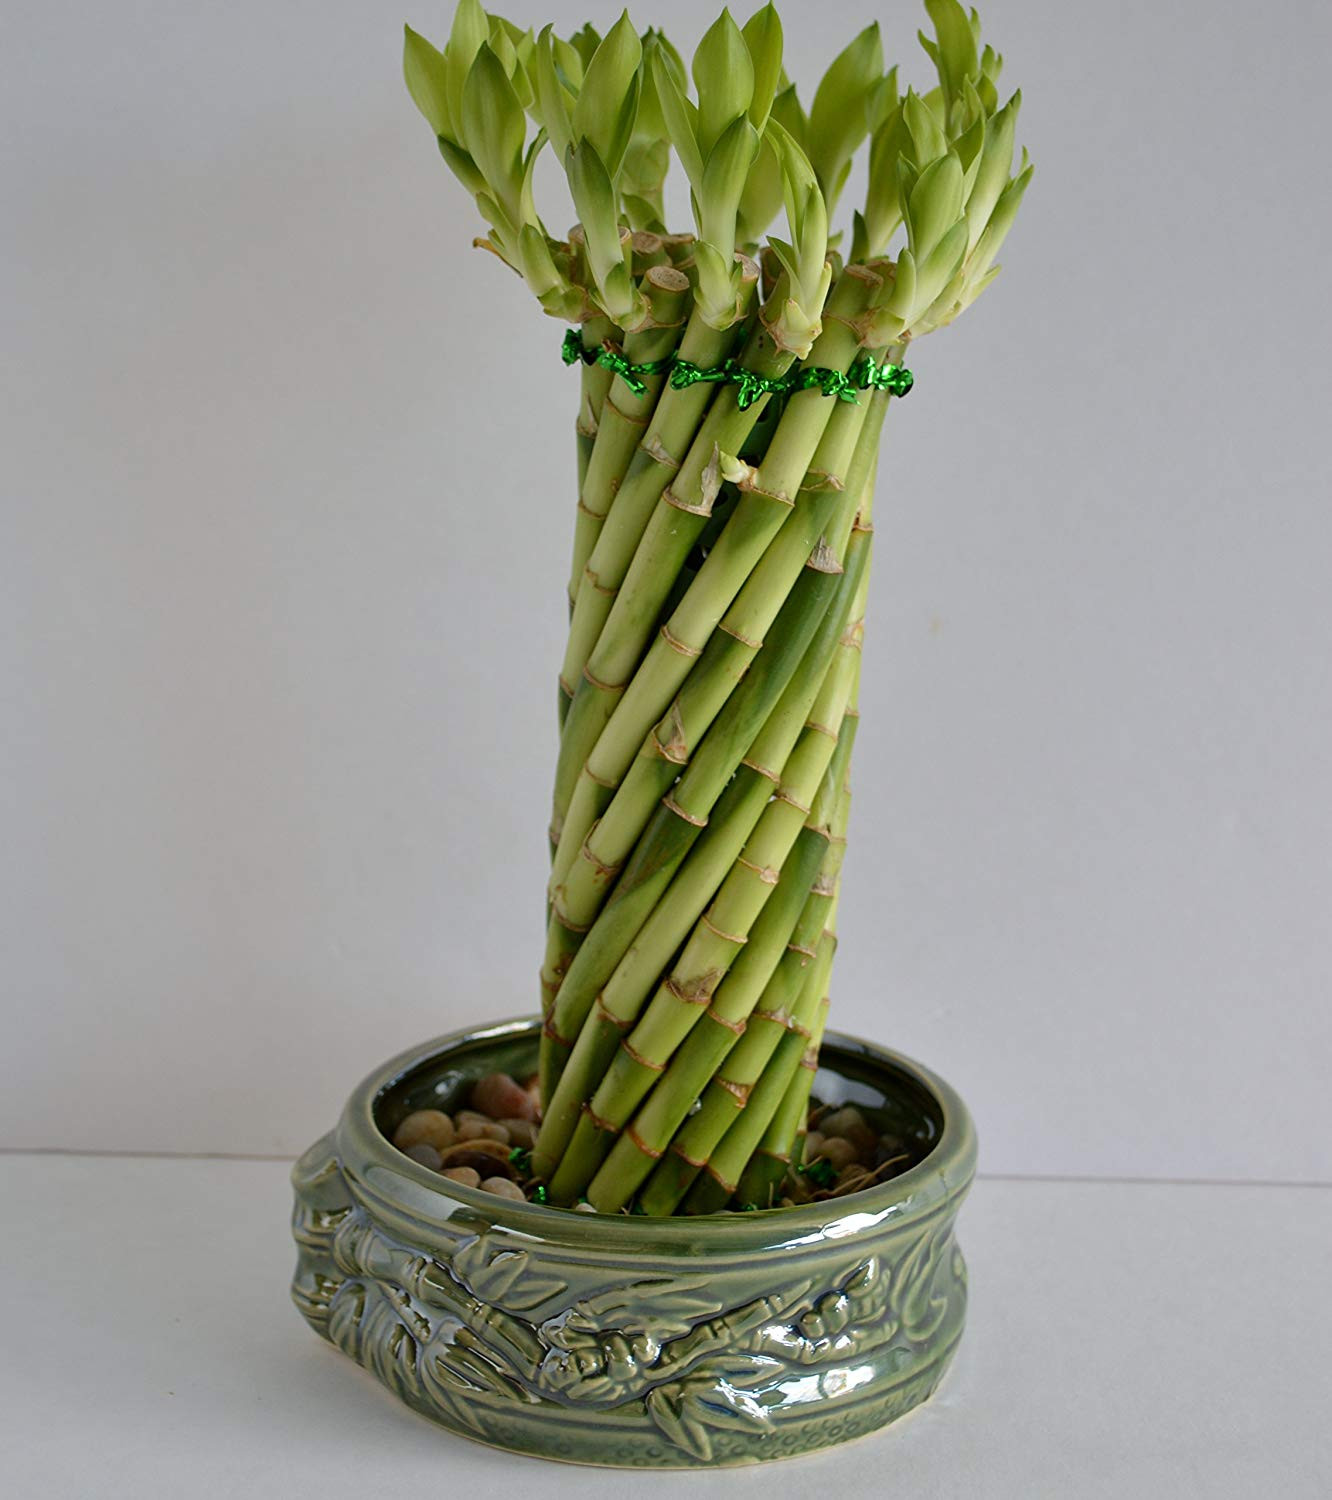 13 Lovable Vase for Lucky Bamboo Plant 2024 free download vase for lucky bamboo plant of amazon com lucky bamboo twisted design 8 10 set with a handmade with regard to amazon com lucky bamboo twisted design 8 10 set with a handmade ceramic vase fro